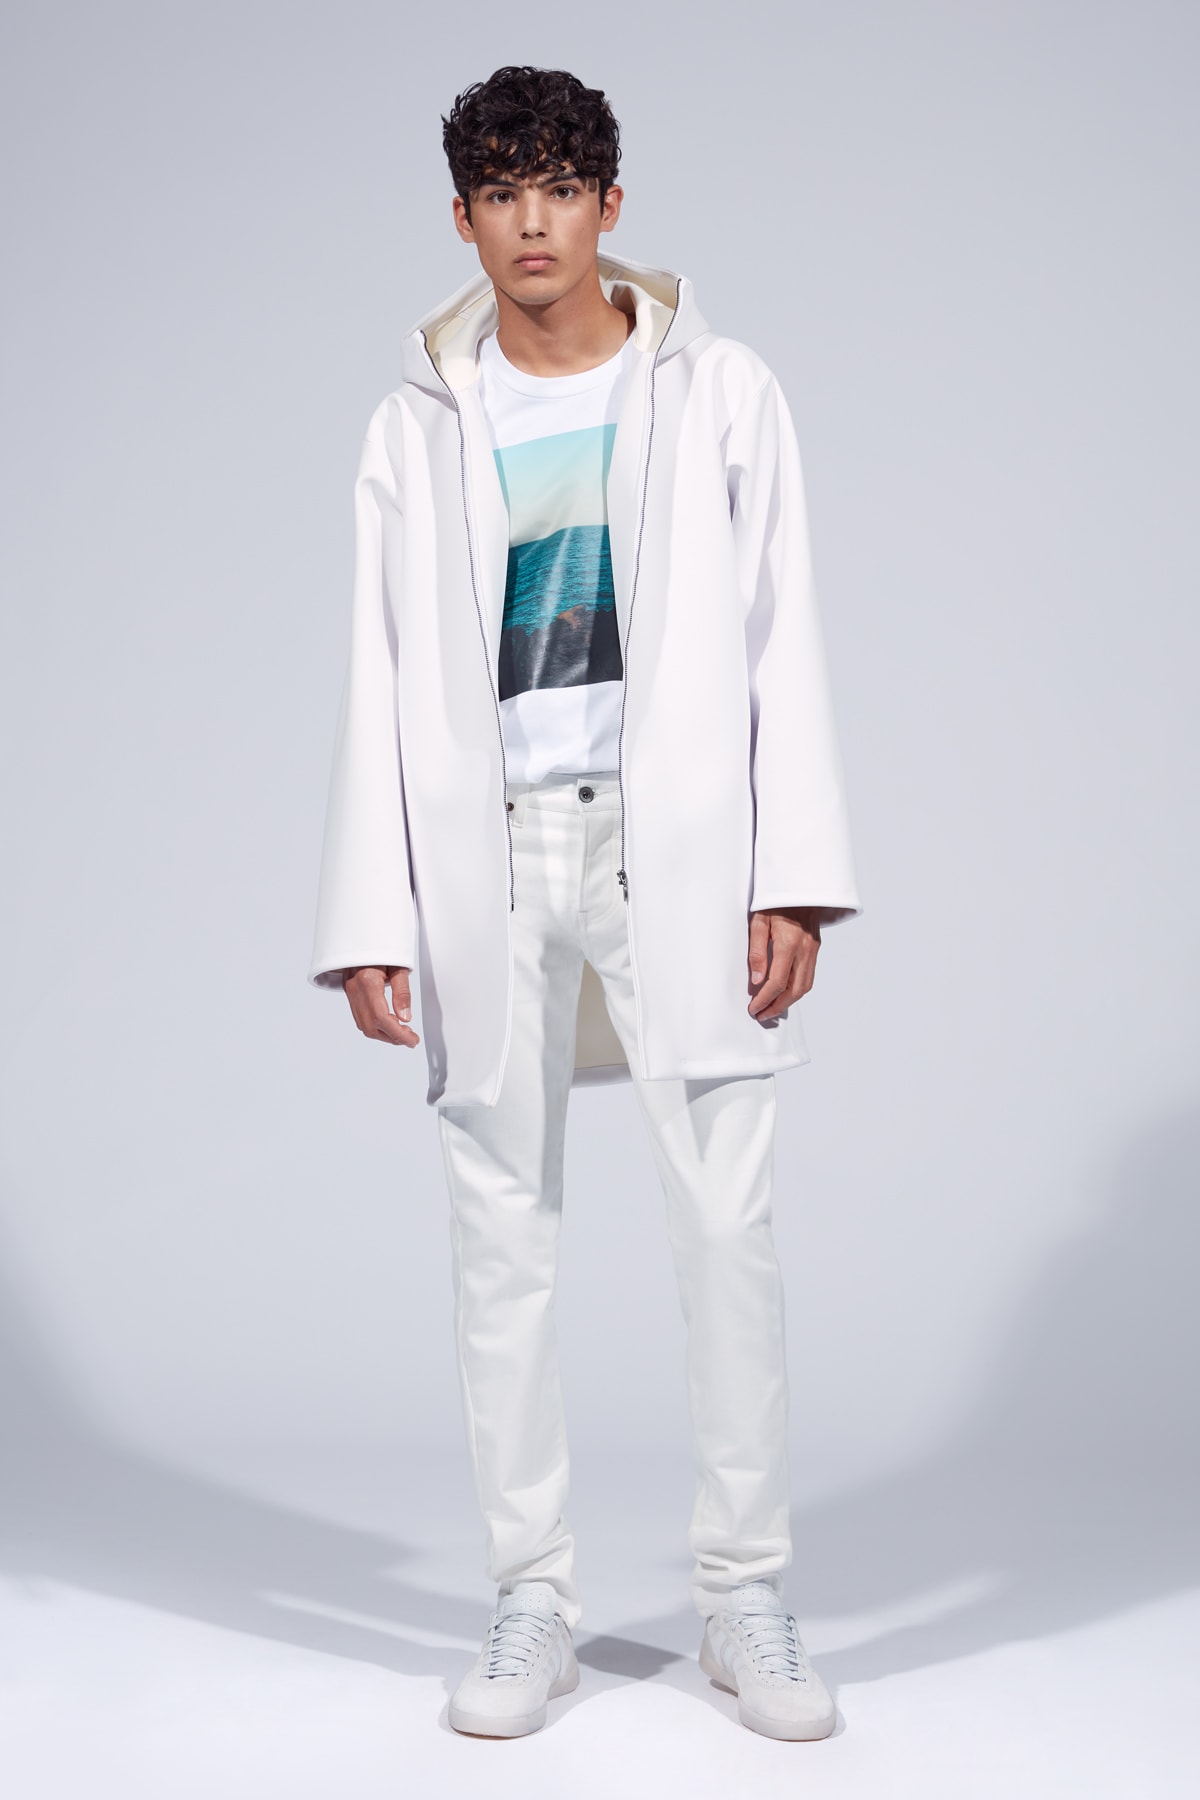 Fiorucci Spring Summer 2019 Collection Lookbook Jacket Shirt Pants White